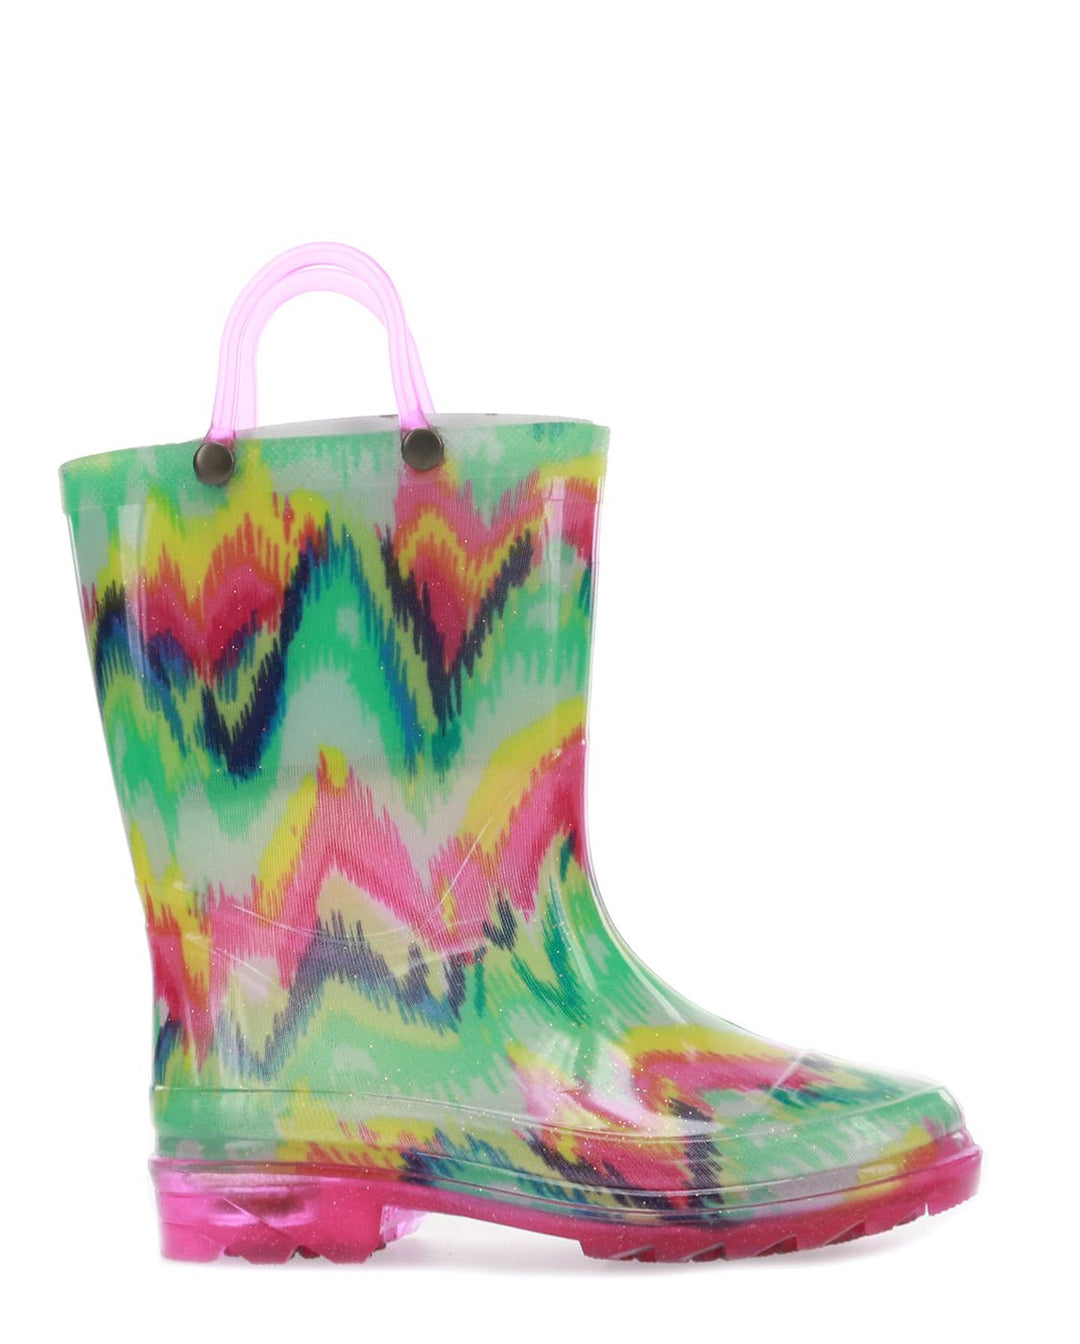 Kids Tie Dye Party Lighted Rain Boot - Multi - Western Chief